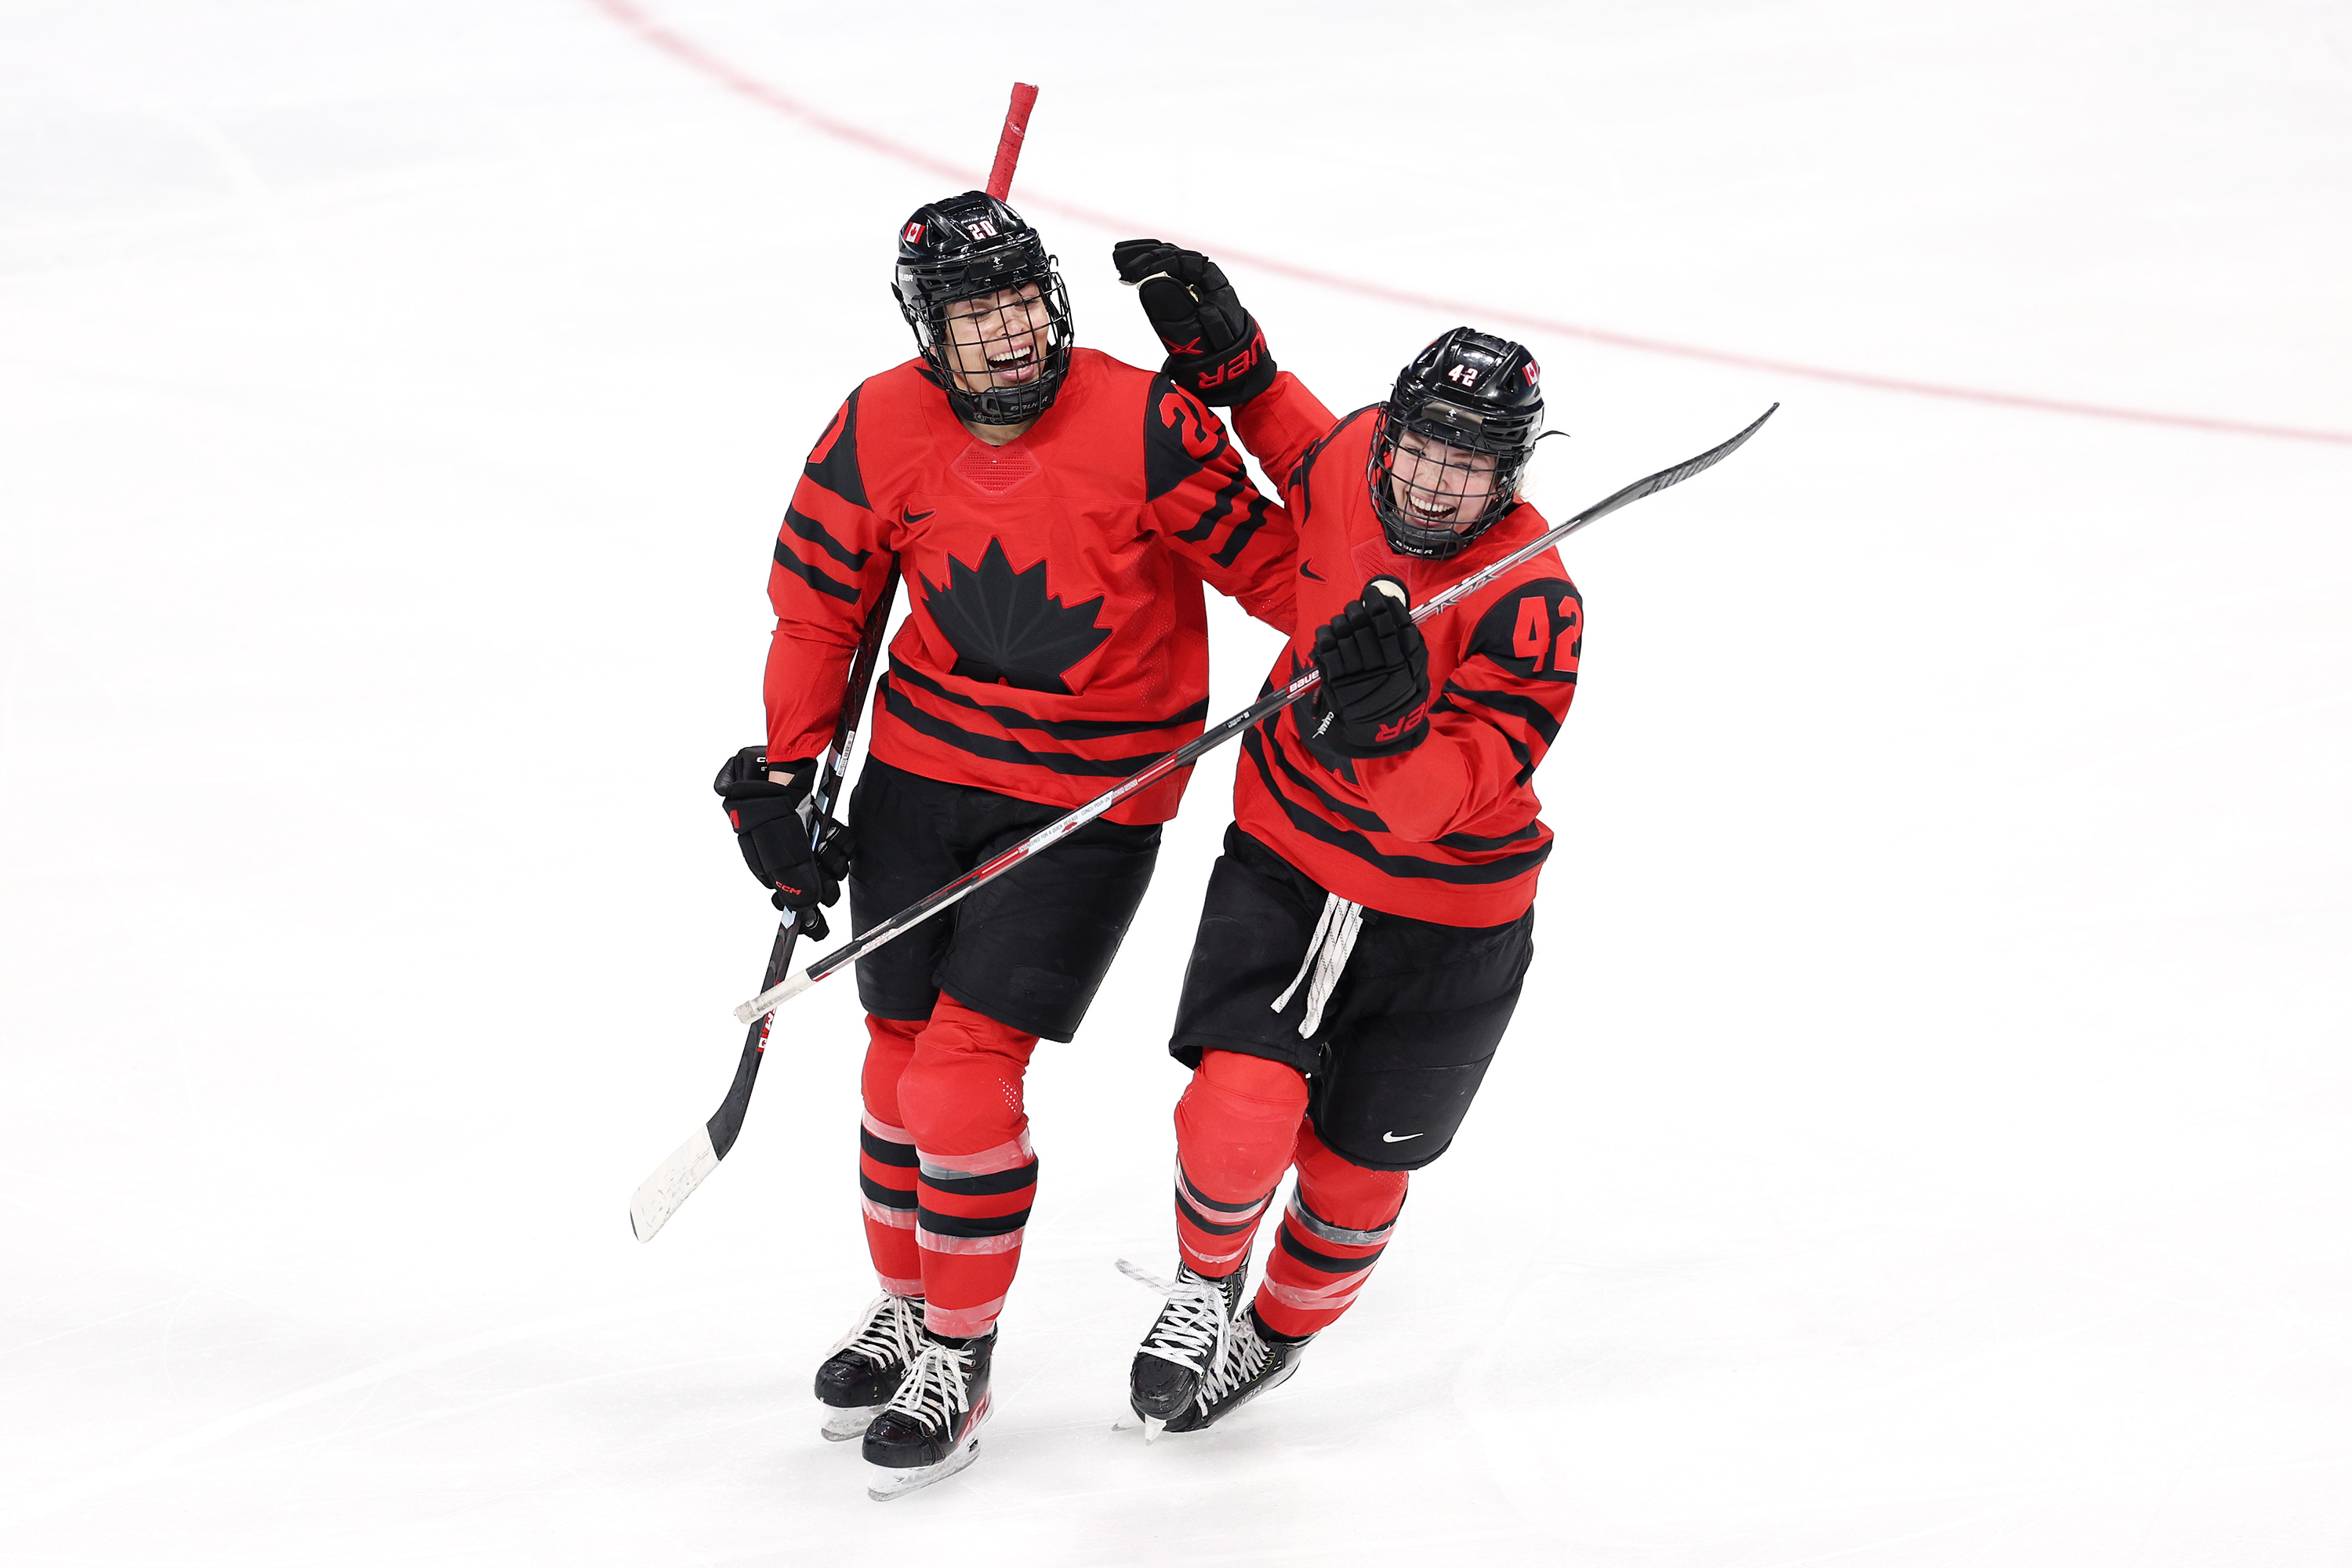 33) Canada beats old rival USA 3-2 to win gold in women's ice hockey final